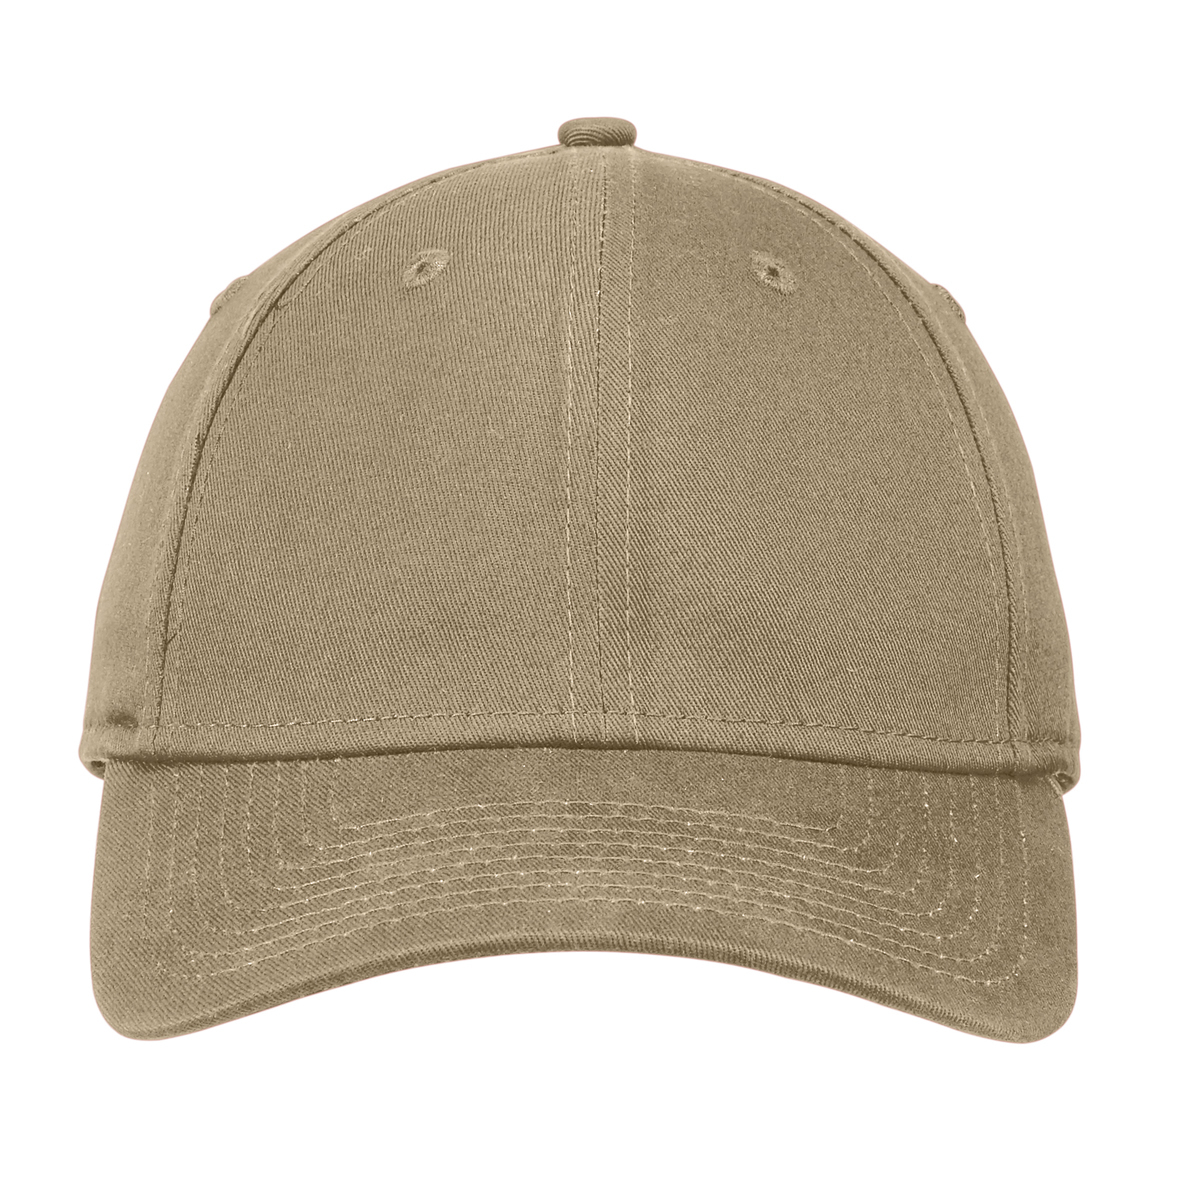 NE200 New Era® - Adjustable Structured Cap - Orleans Embroidery